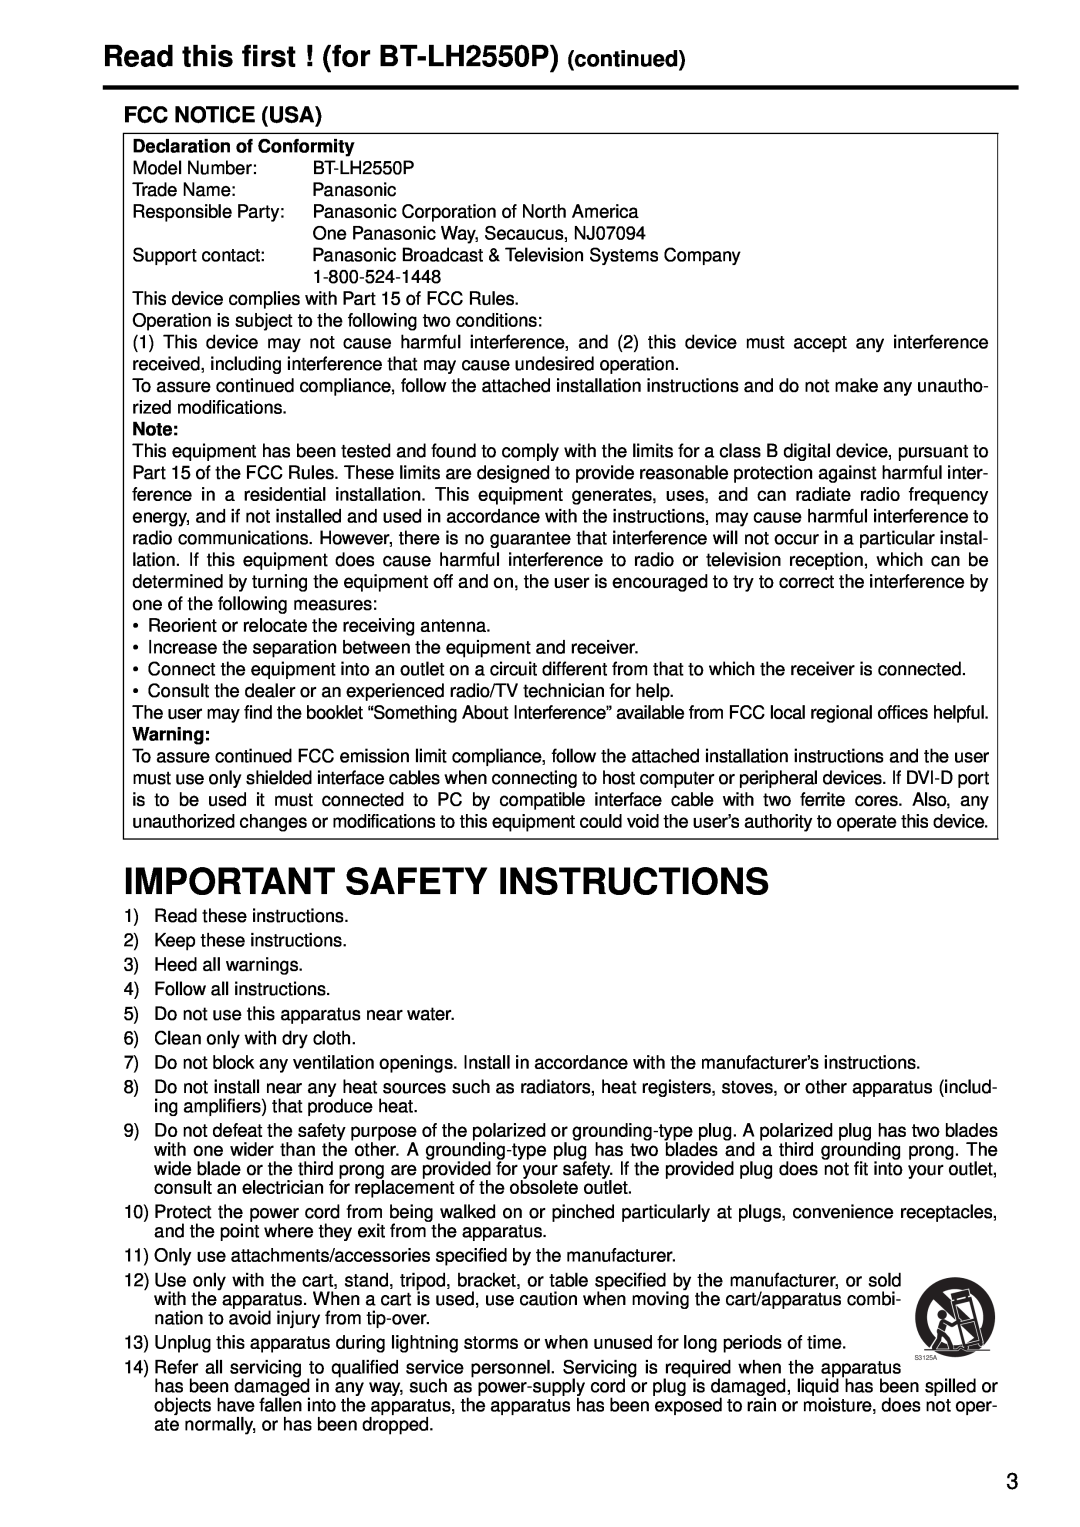 Panasonic BT-LH2550E manual Read this first ! for BT-LH2550P continued, Fcc Notice Usa, Important Safety Instructions 